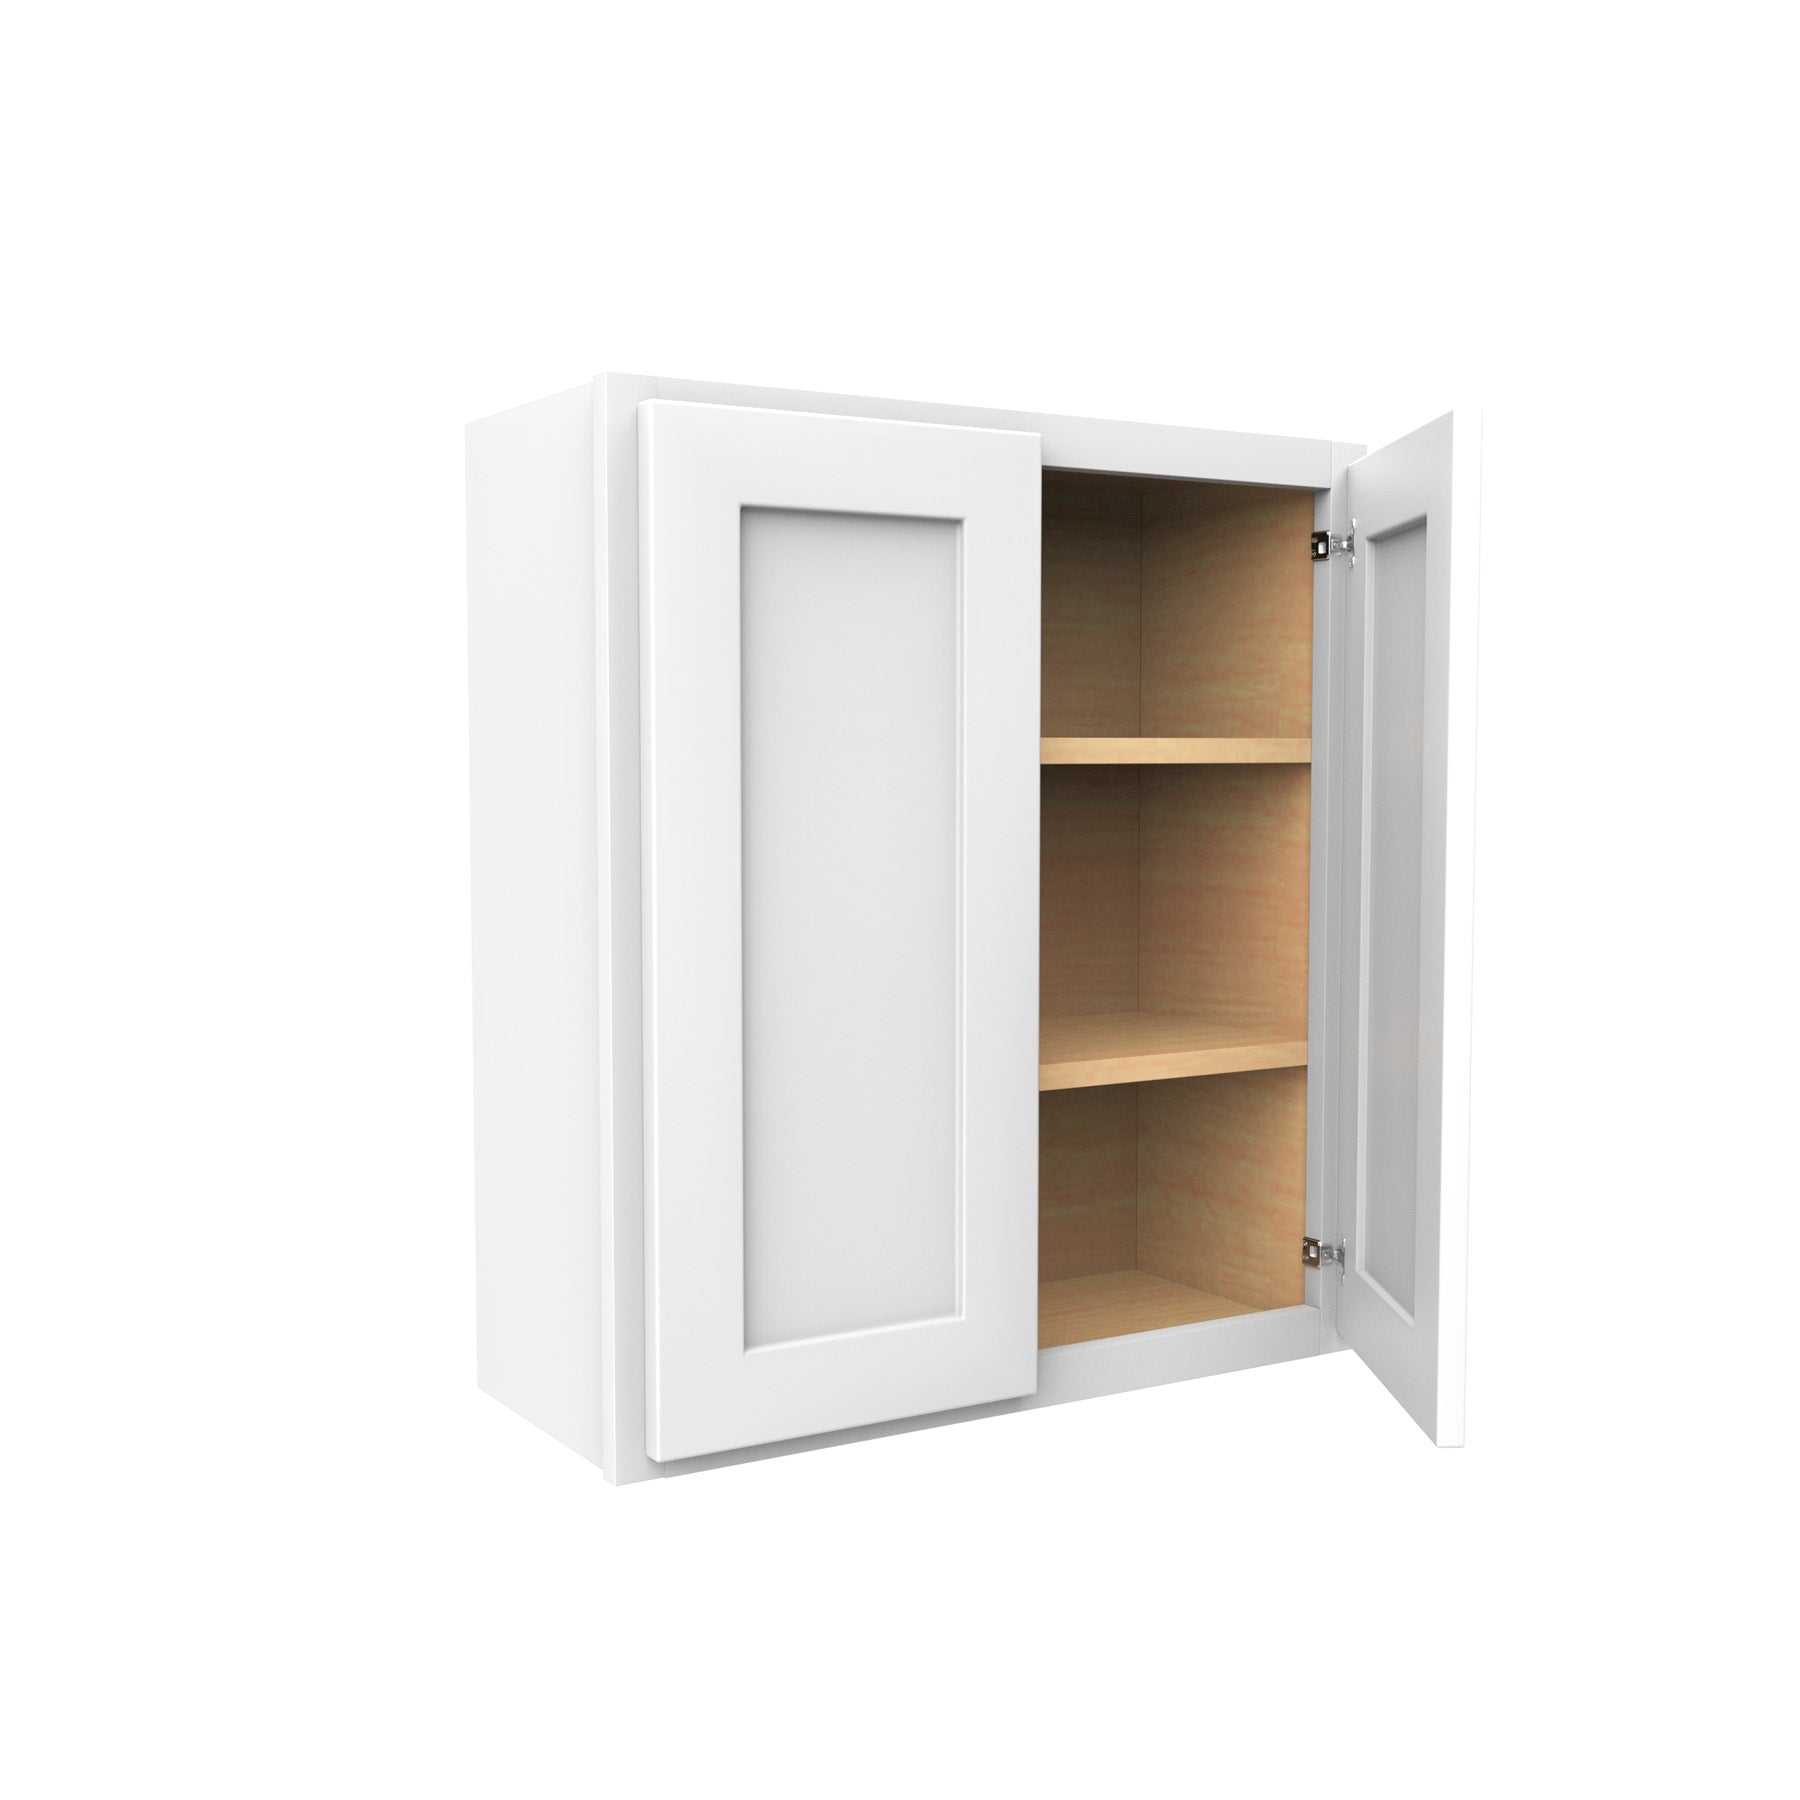 Luxor White - Double Door Wall Cabinet | 27"W x 30"H x 12"D